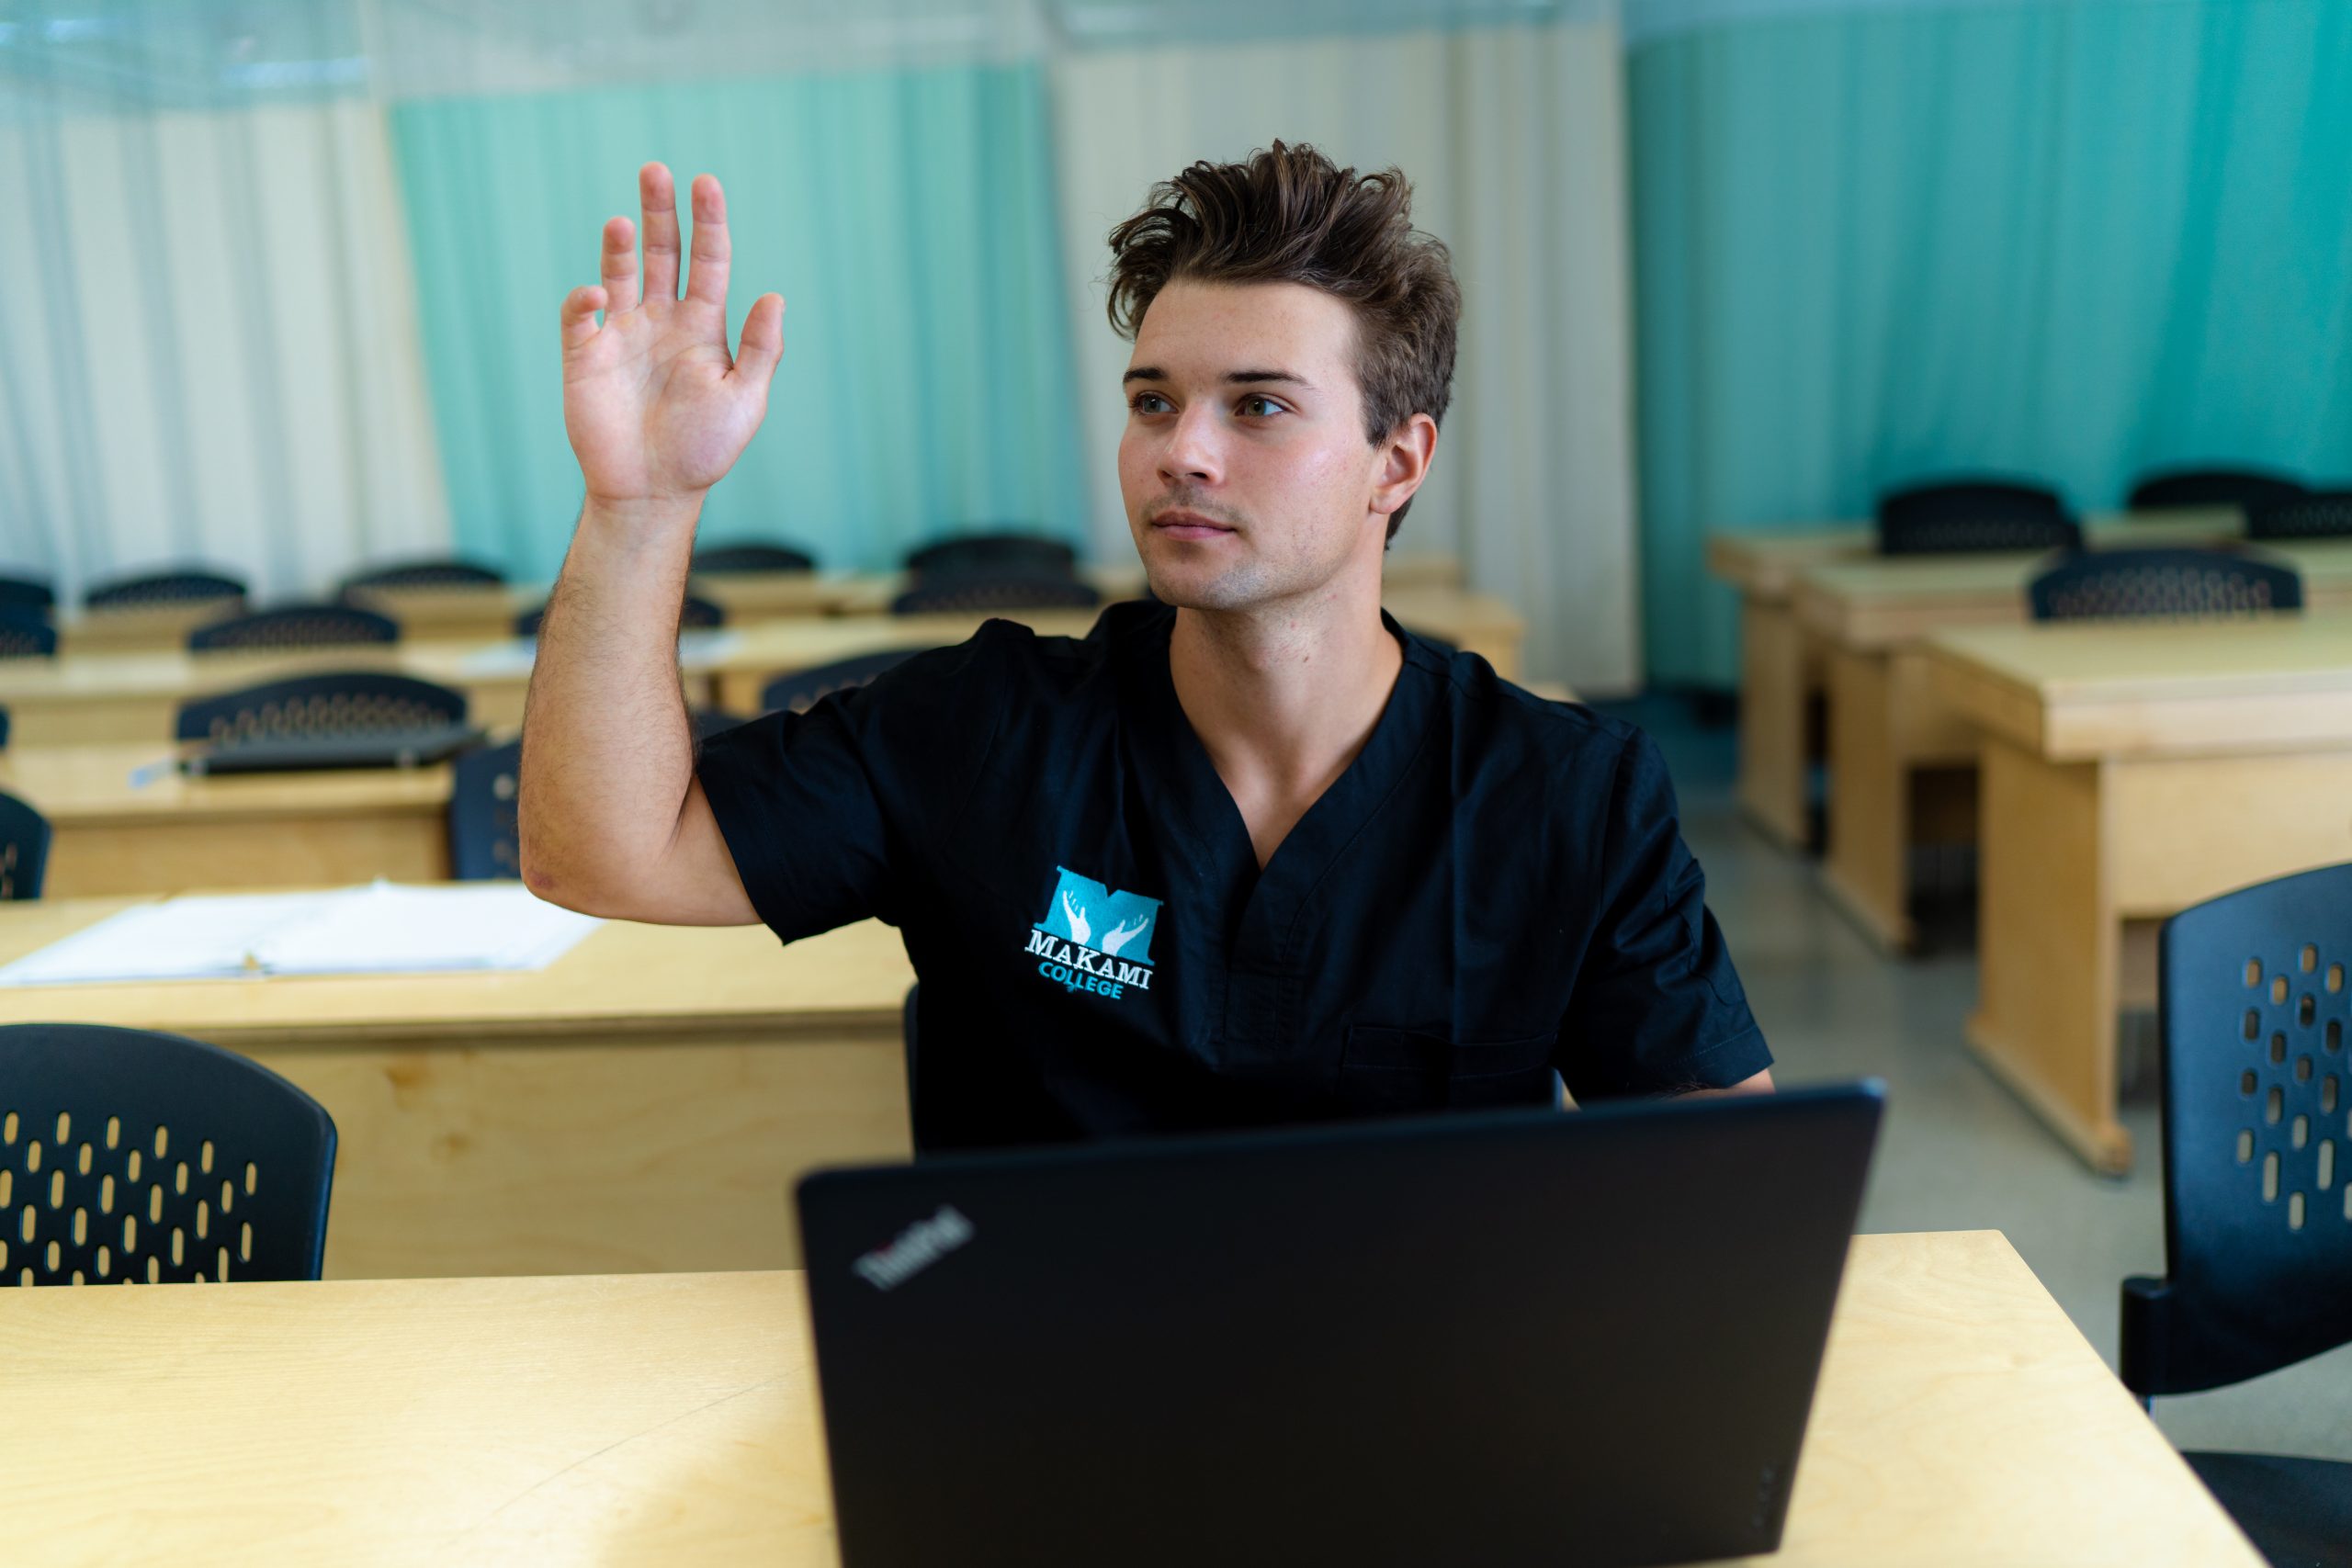 A young male MaKami College student raises his hand in an classroom while behind a black lap top